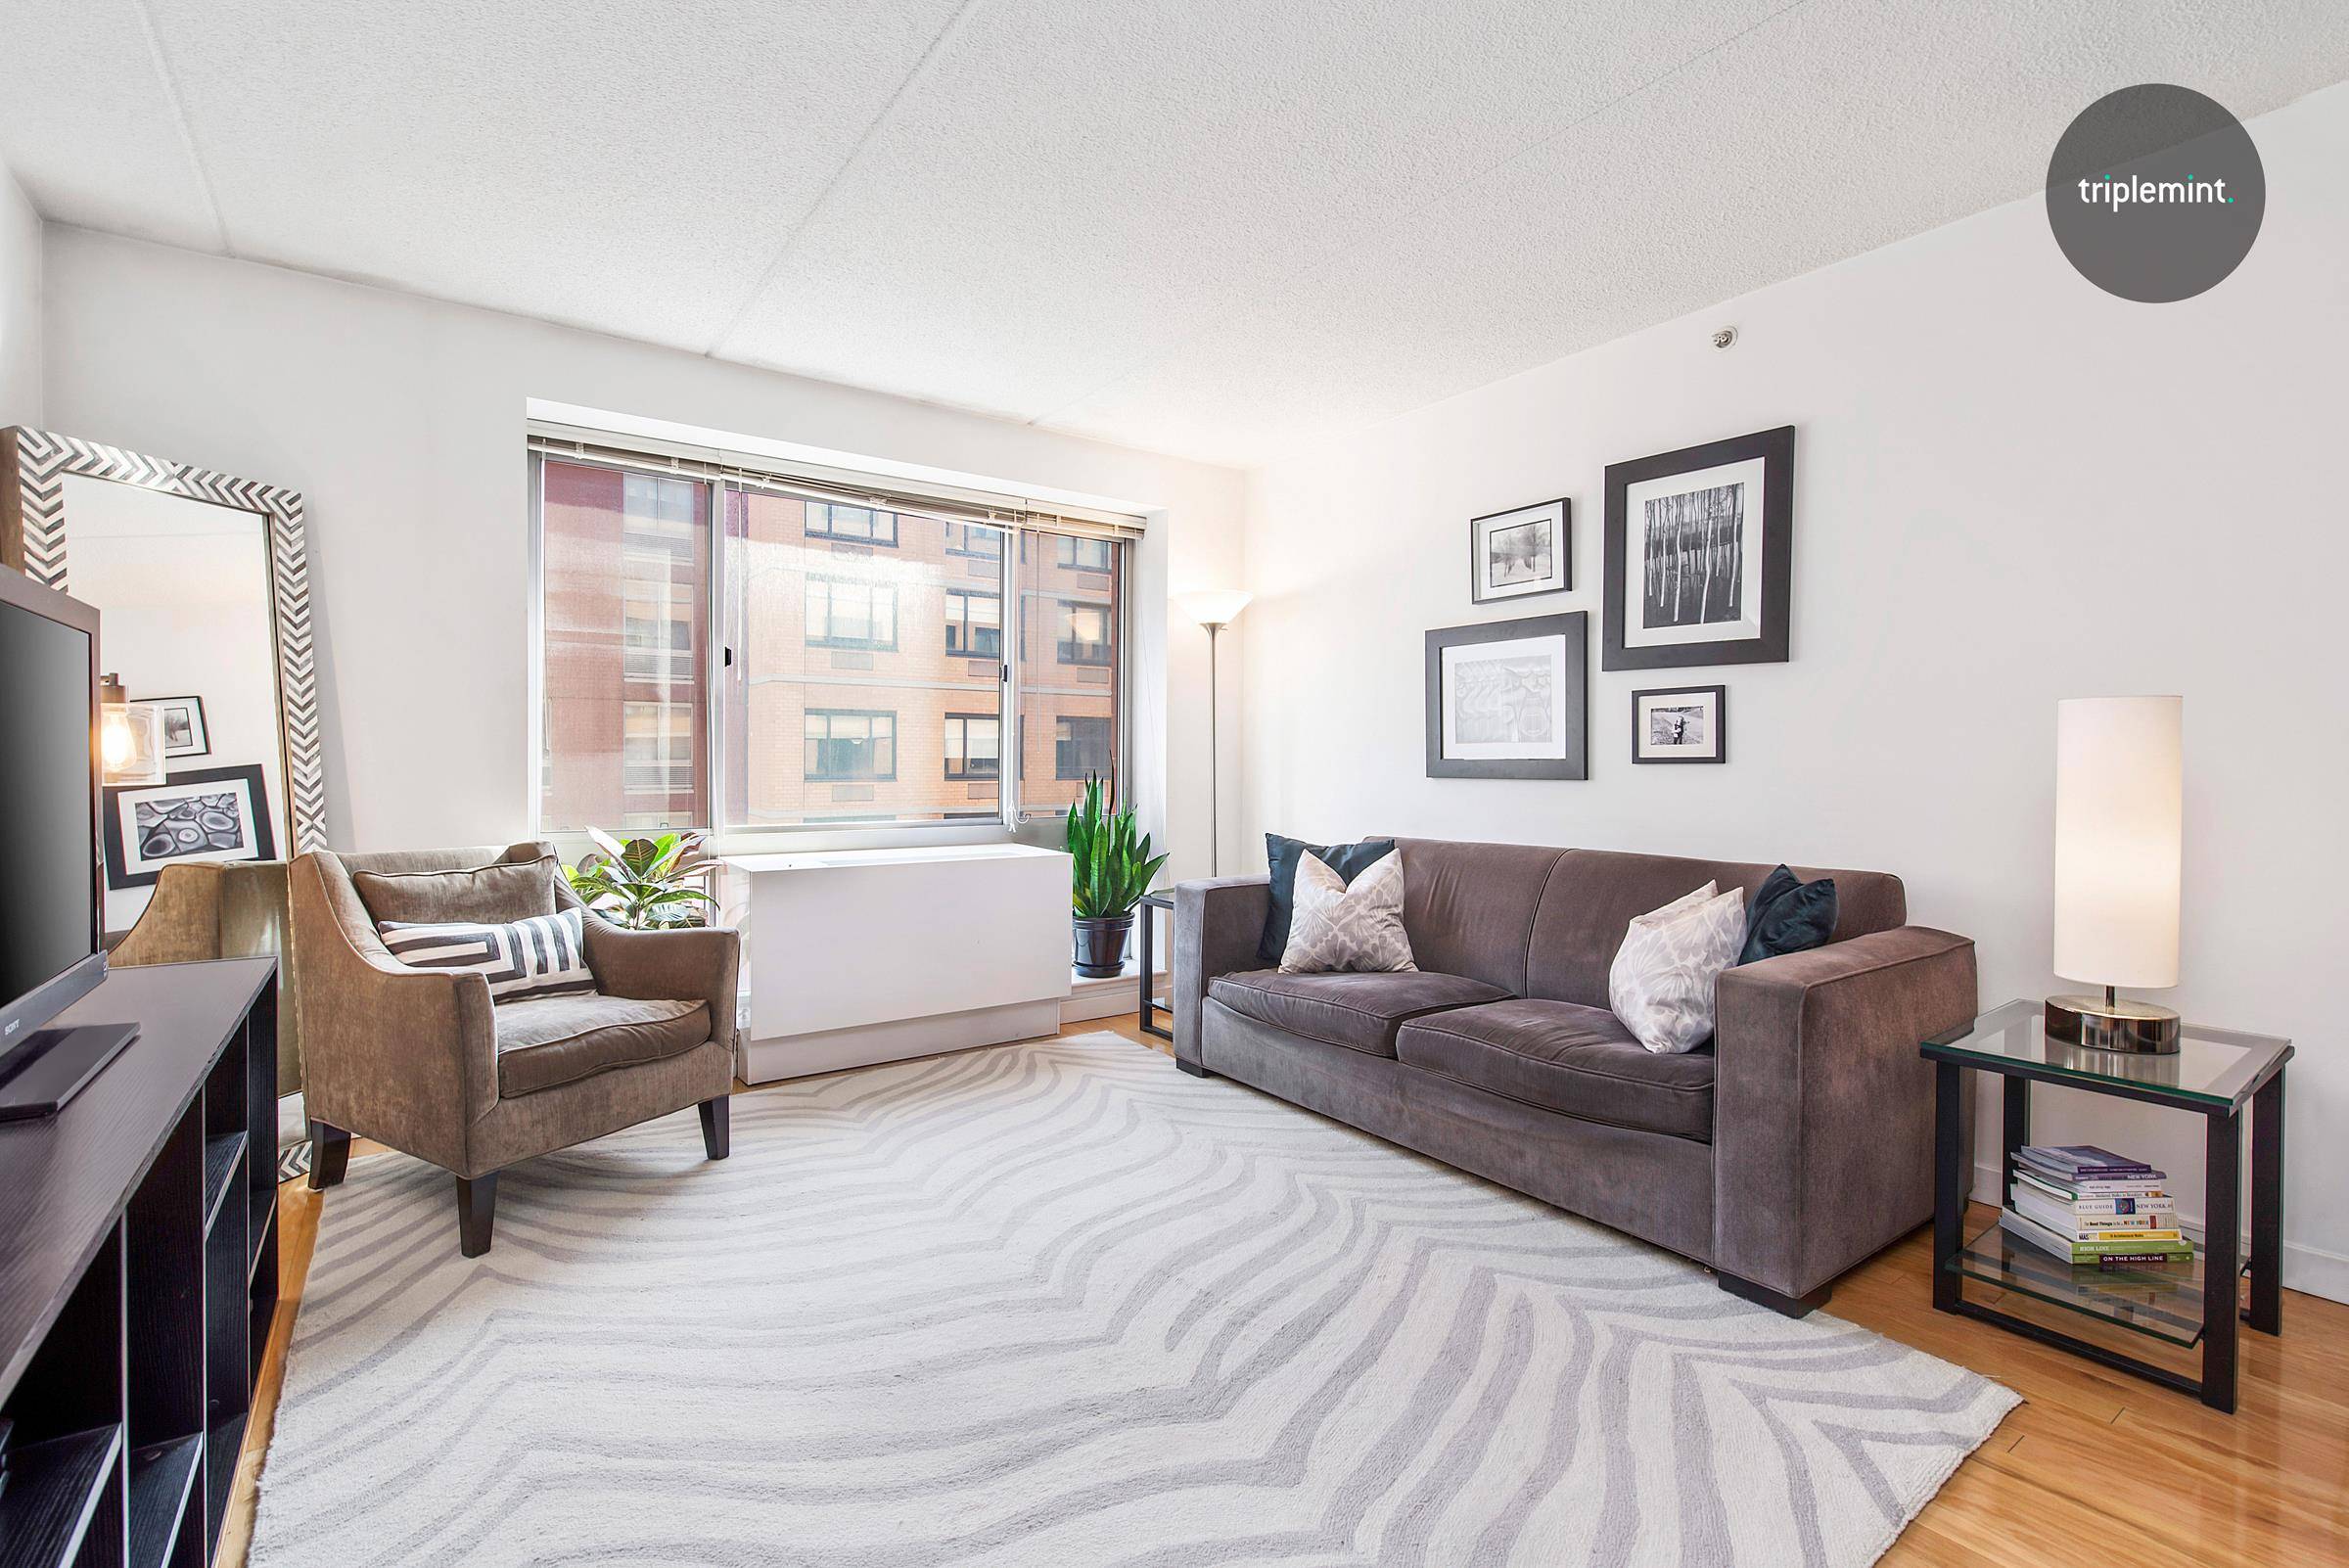 This bright and spacious one bedroom home is located in a 24 hour, full service doorman building in prime West Chelsea.